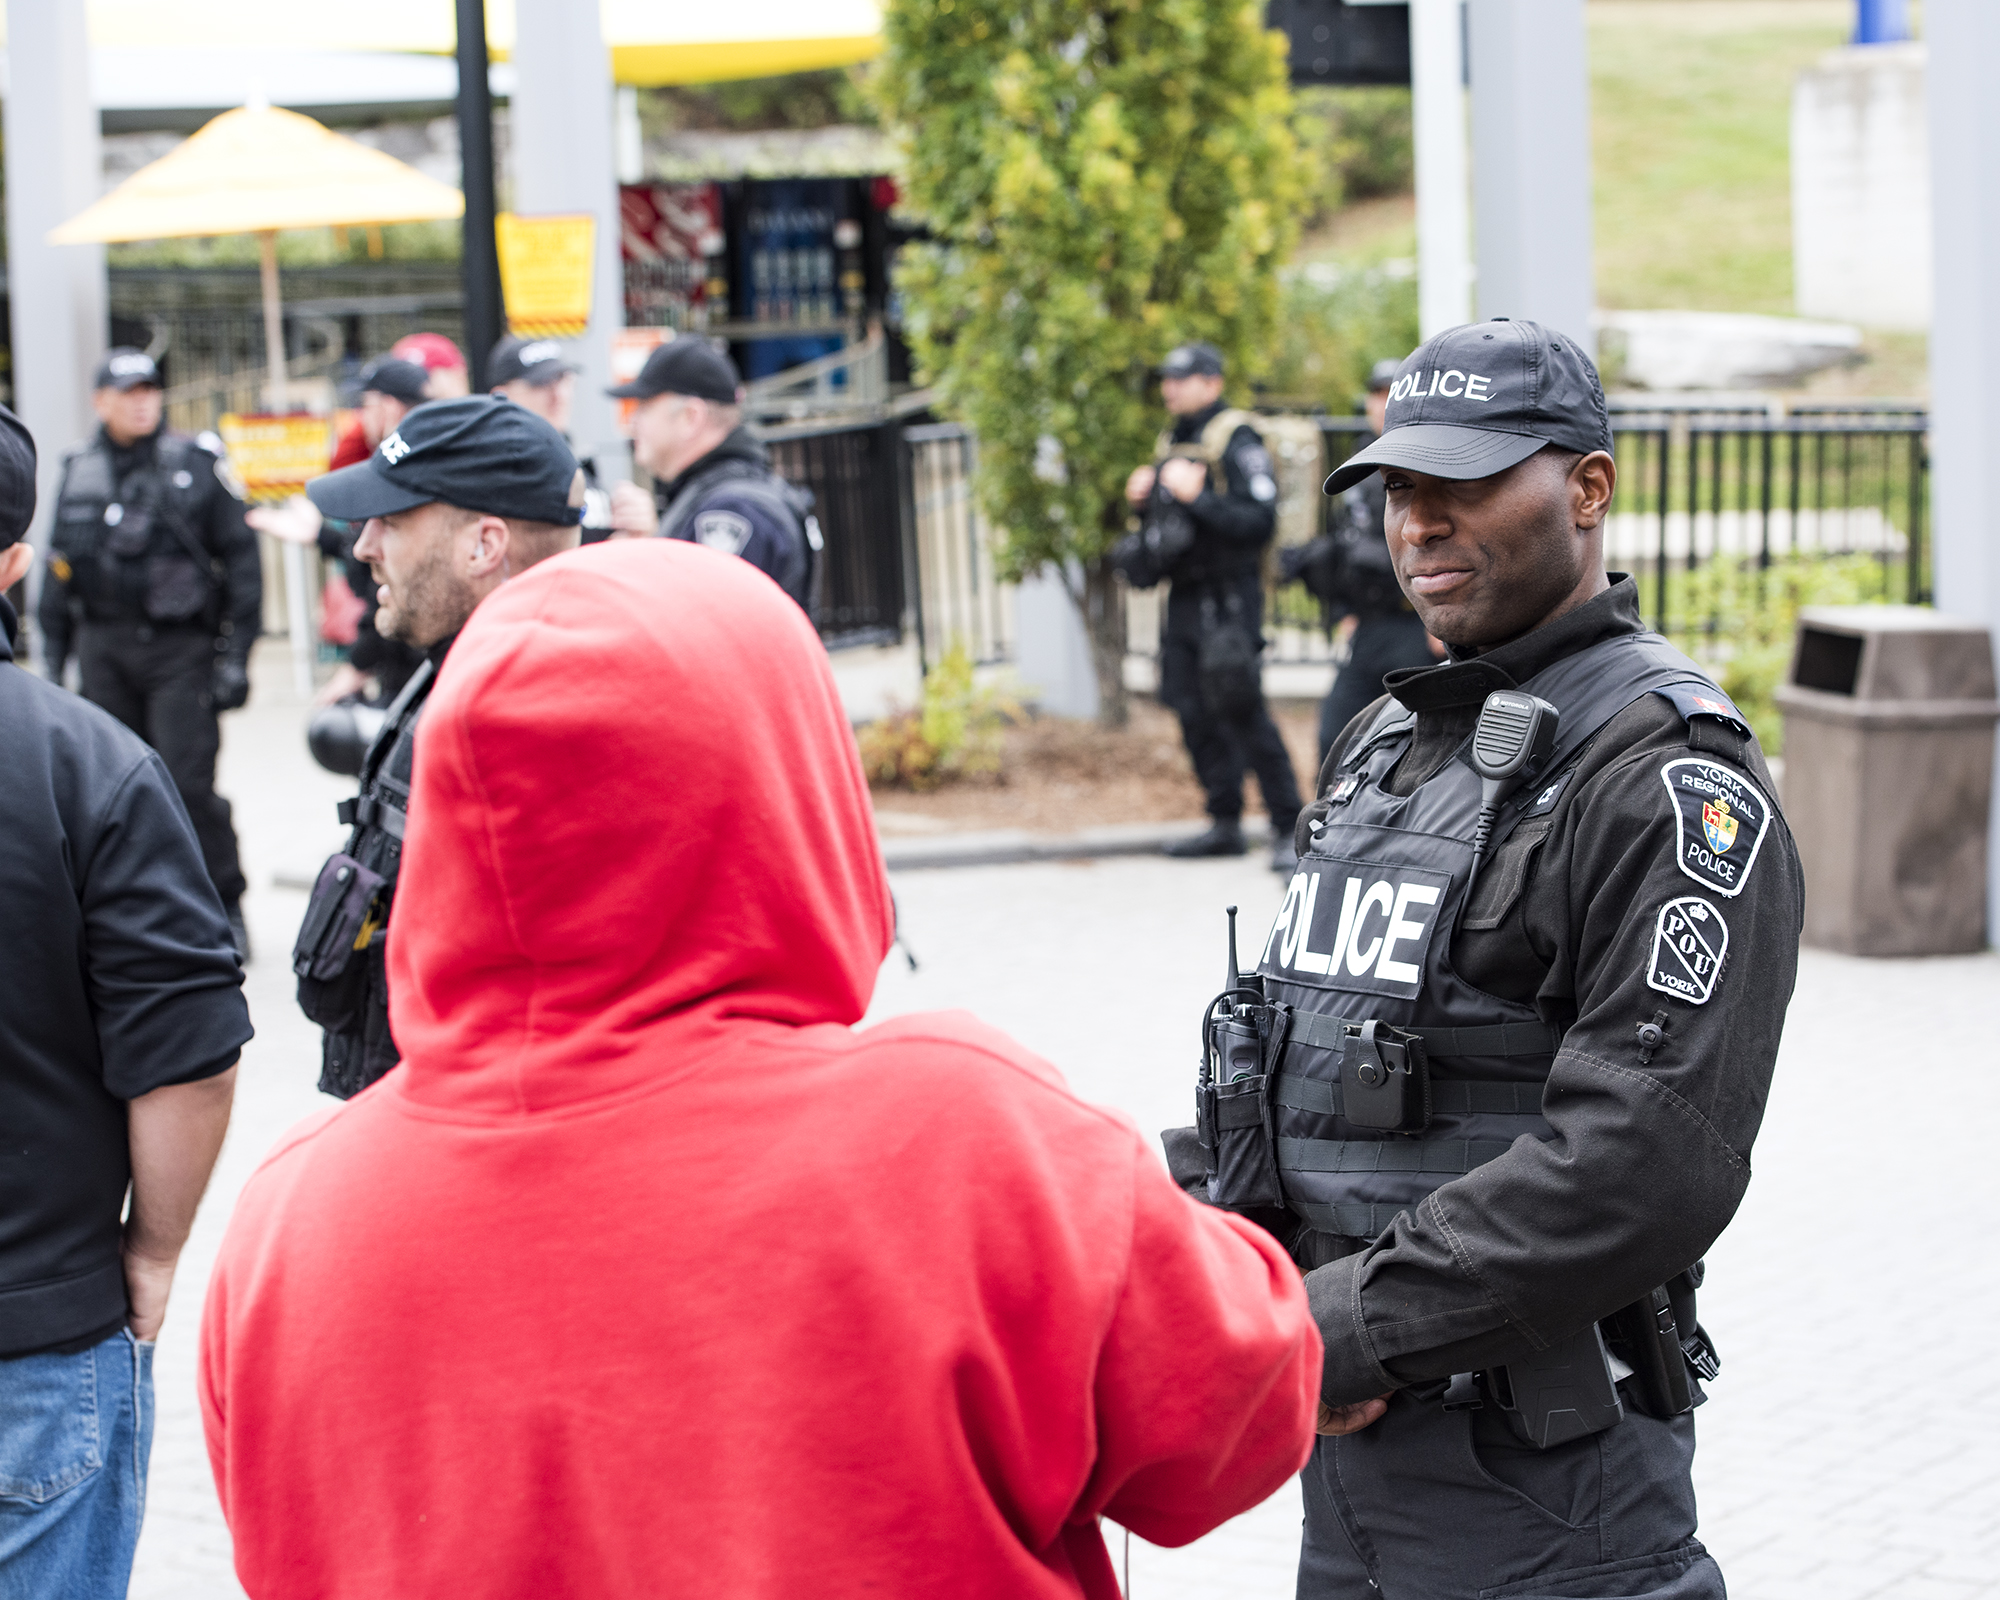 An officer speaks to a person at a protest